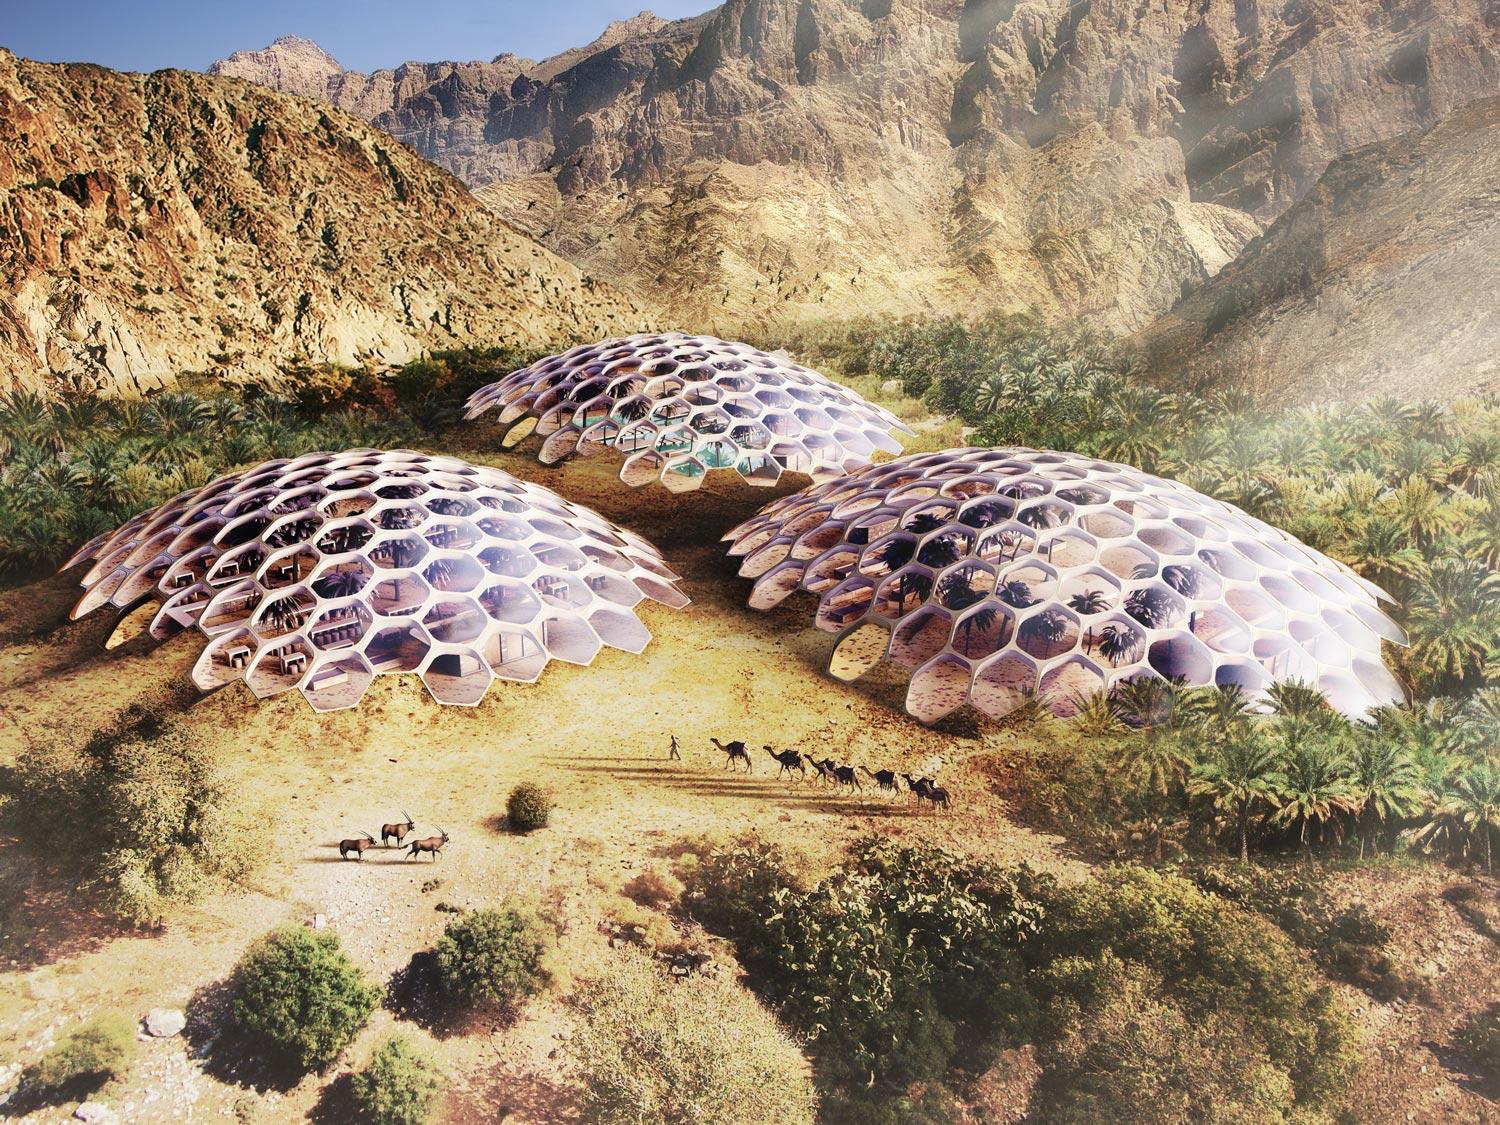 The project will provide facilities for a wildlife conservation centre, a restaurant, educational workshops and an adventure-based wilderness retreat / Baharash Architecture